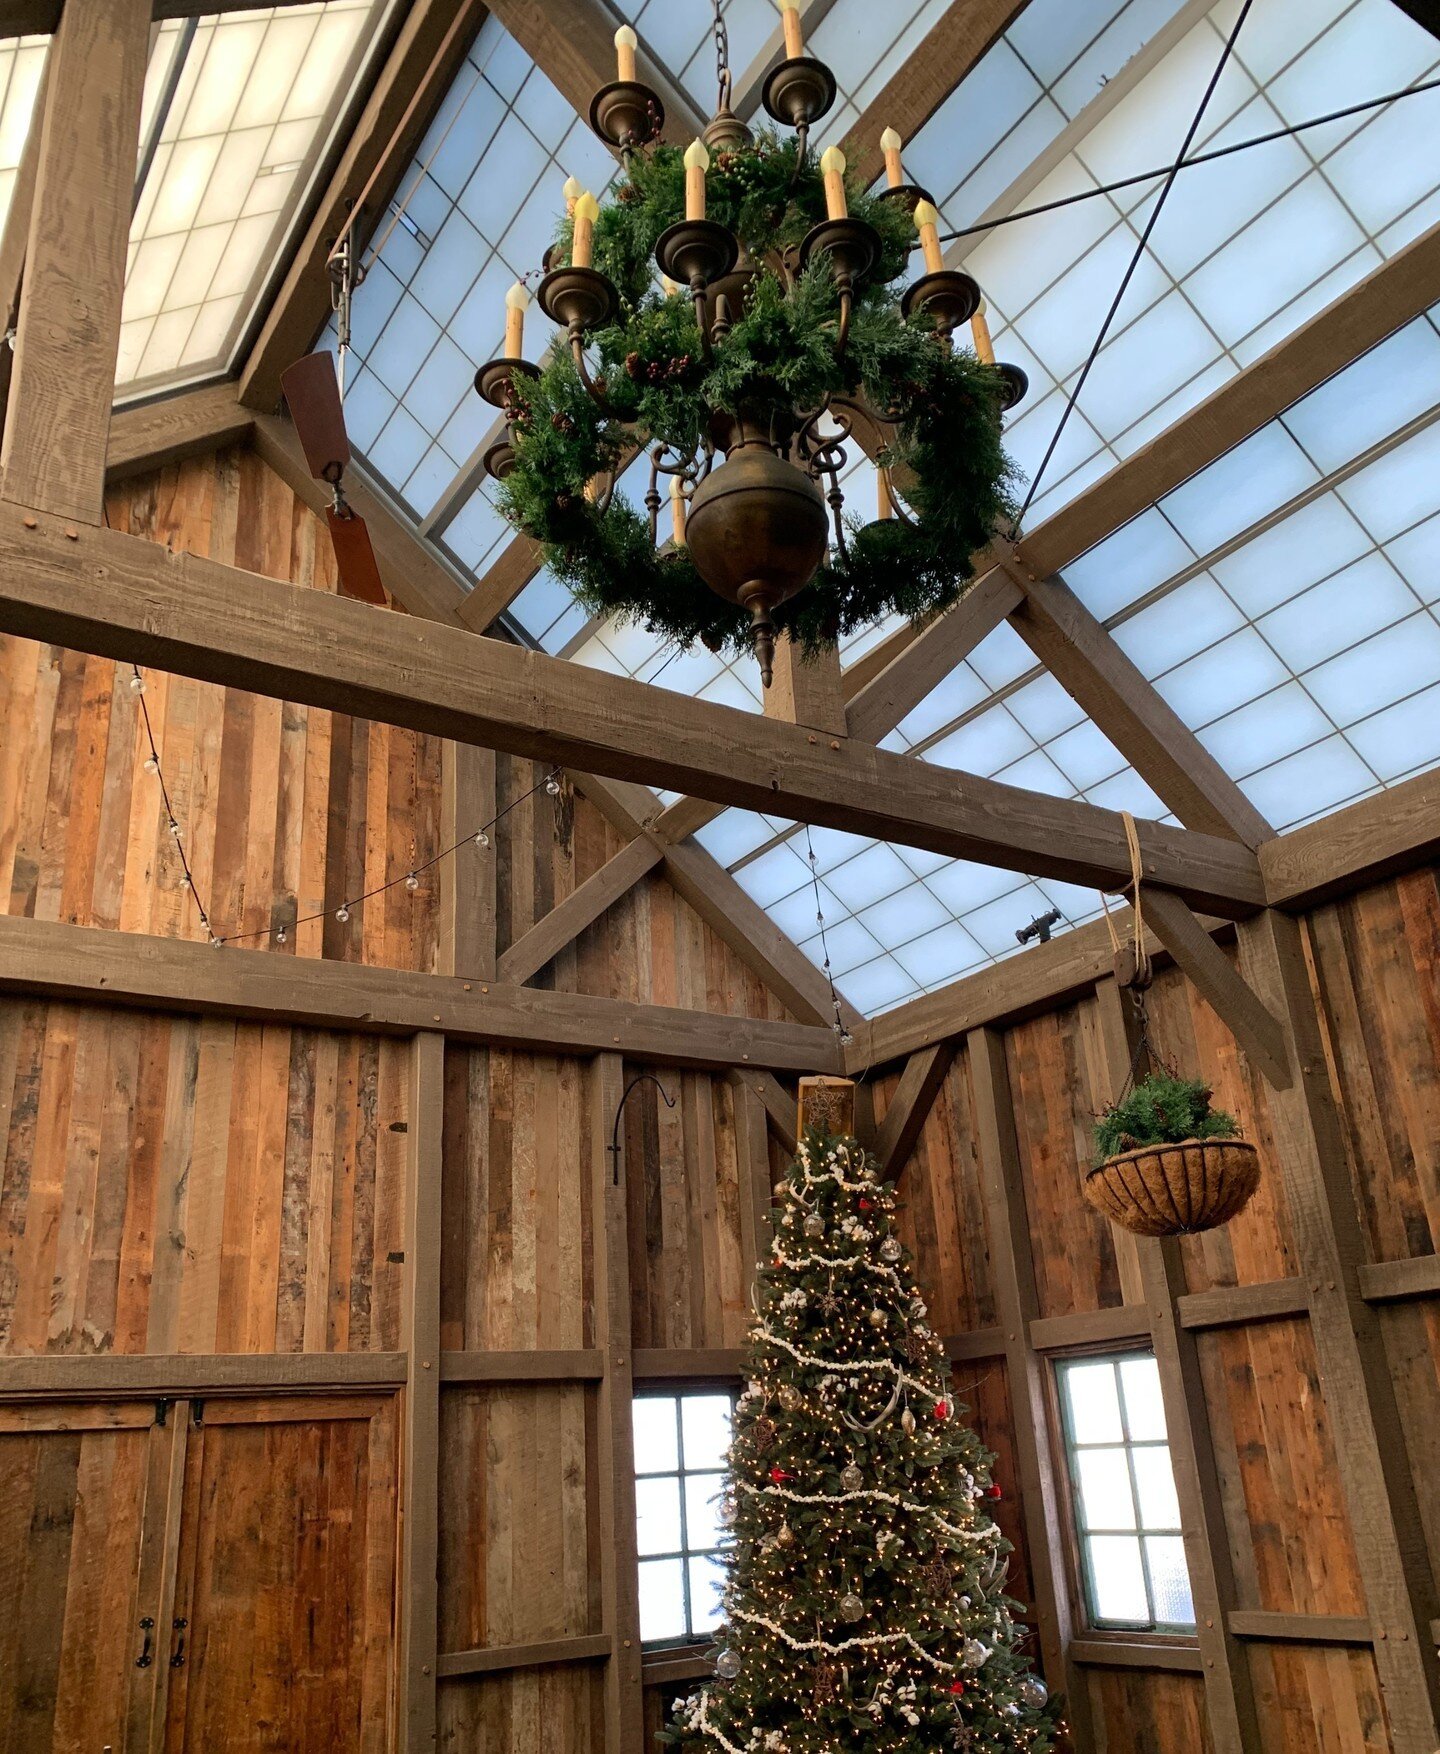 Book your holiday party in our gorgeous, rustic barn @thebarrownj. Visit the link in our bio (or our website) for details!
.
.
.
#privateevents #events #weddings #corporateevents #wedding #eventplanner #catering #party #event 
#eventplanning #babysho